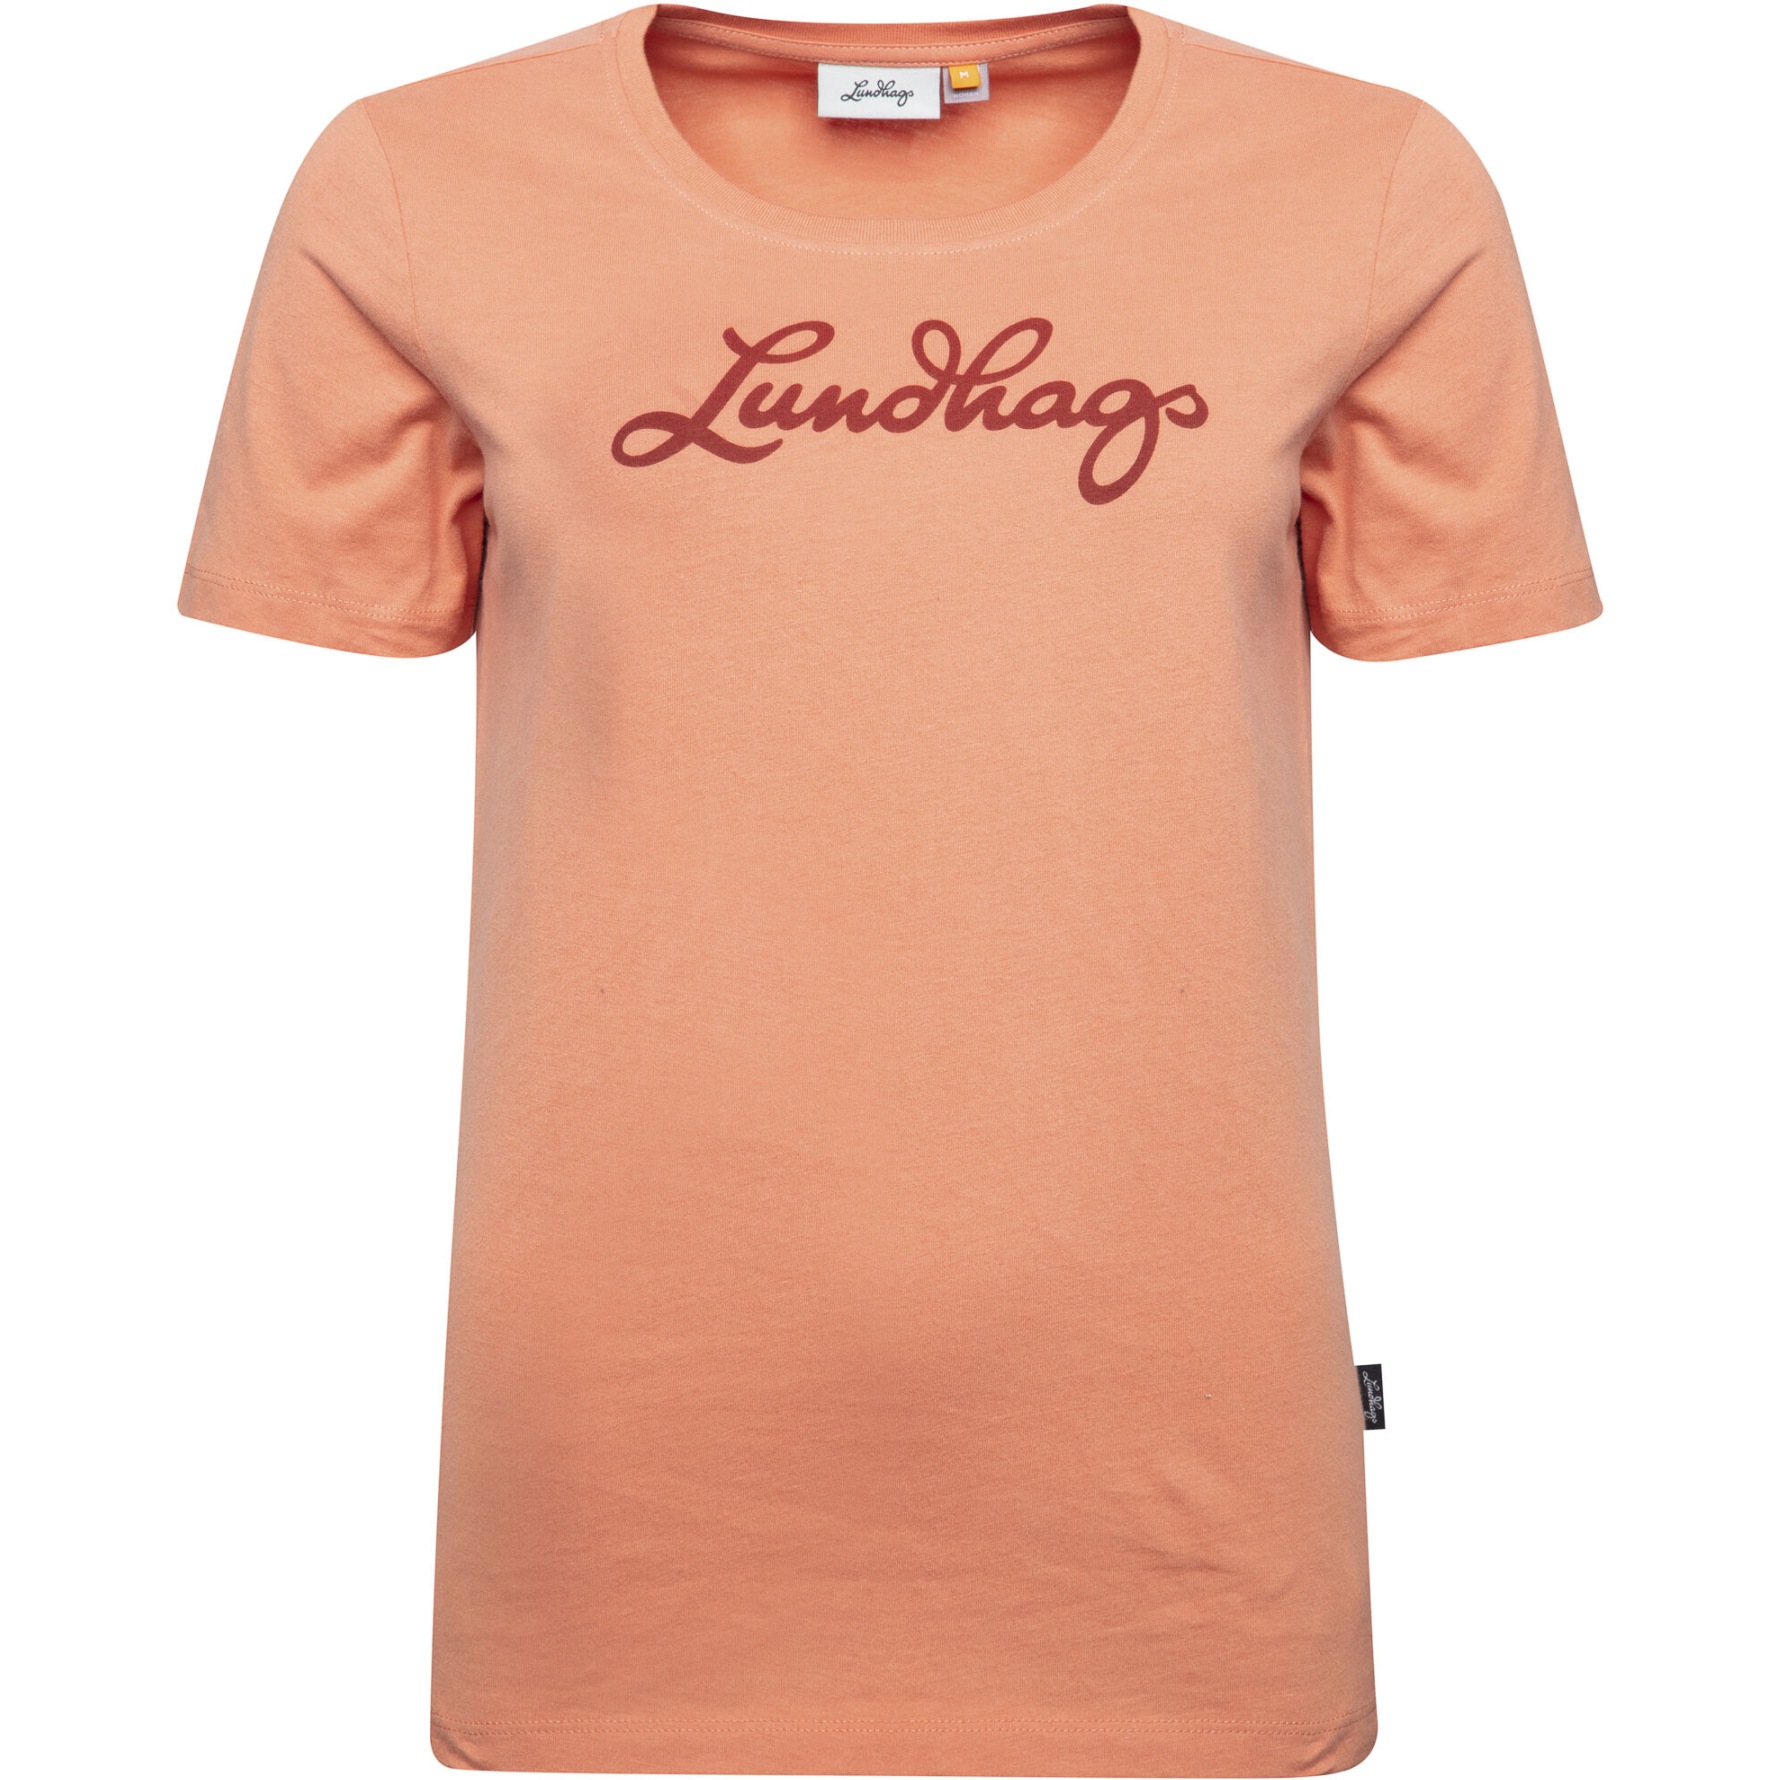 Image of Lundhags Women's Tee - Coral 340